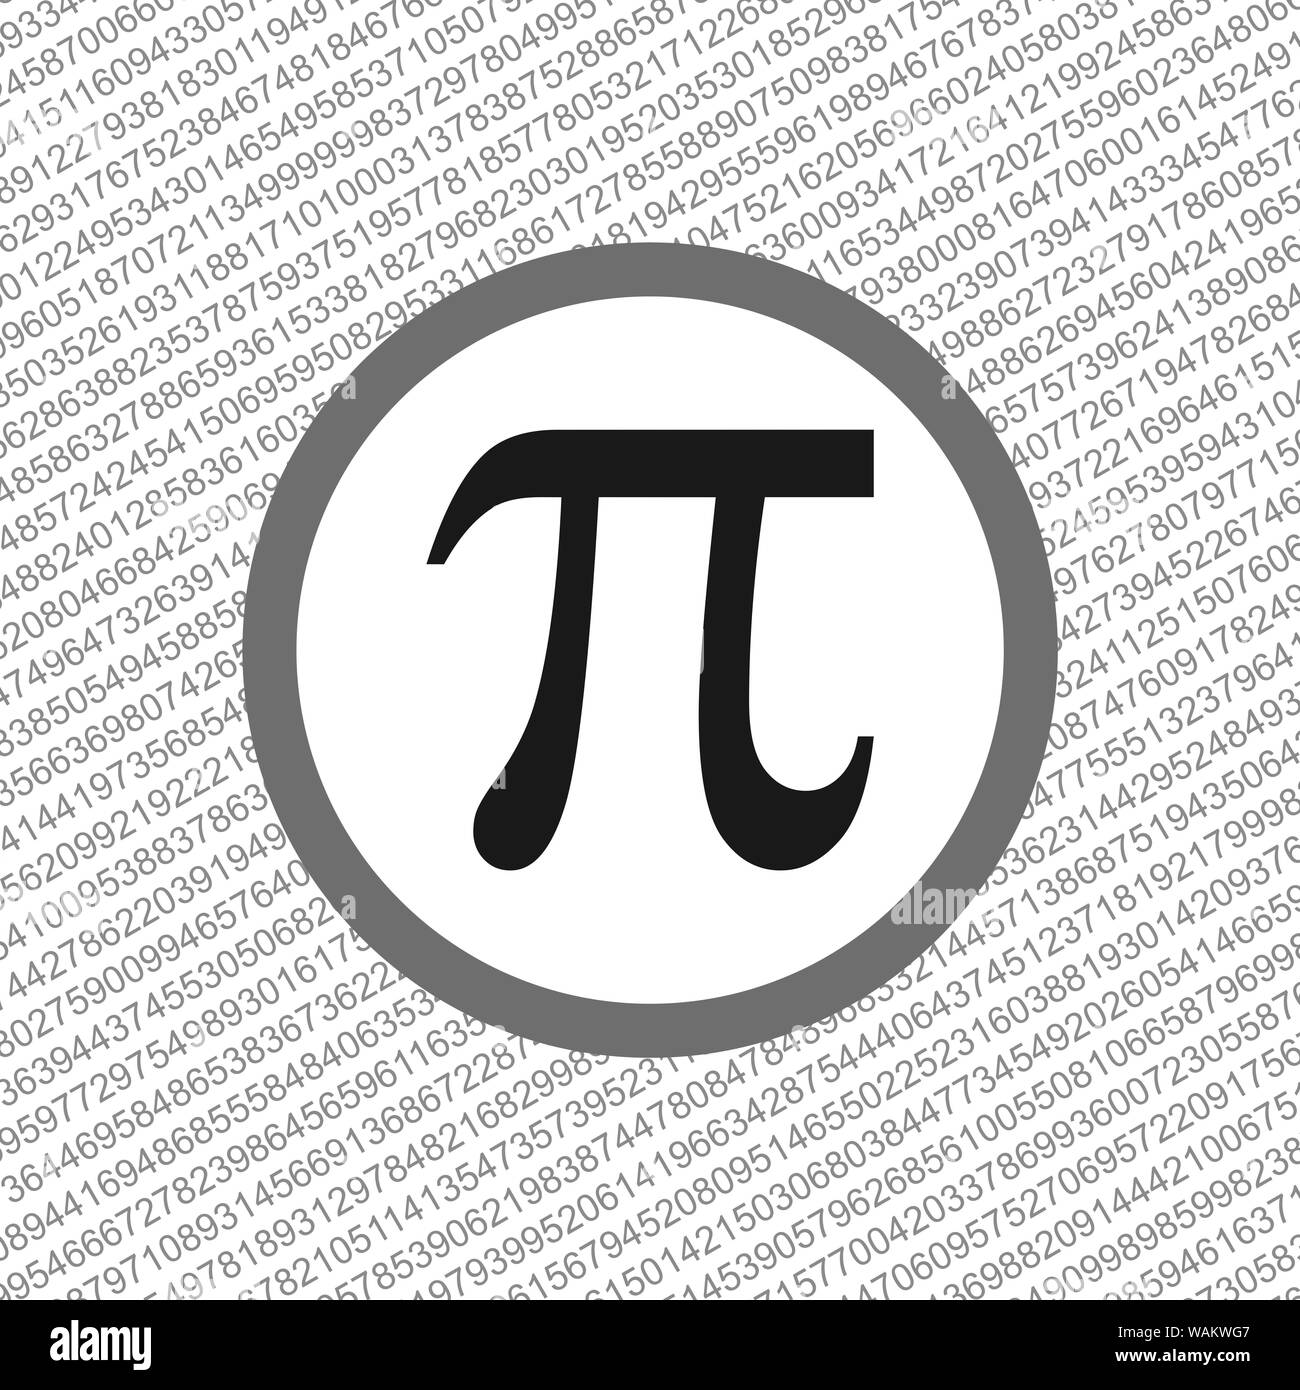 The Pi symbol mathematical constant irrational number on circle, greek letter, background Stock Photo